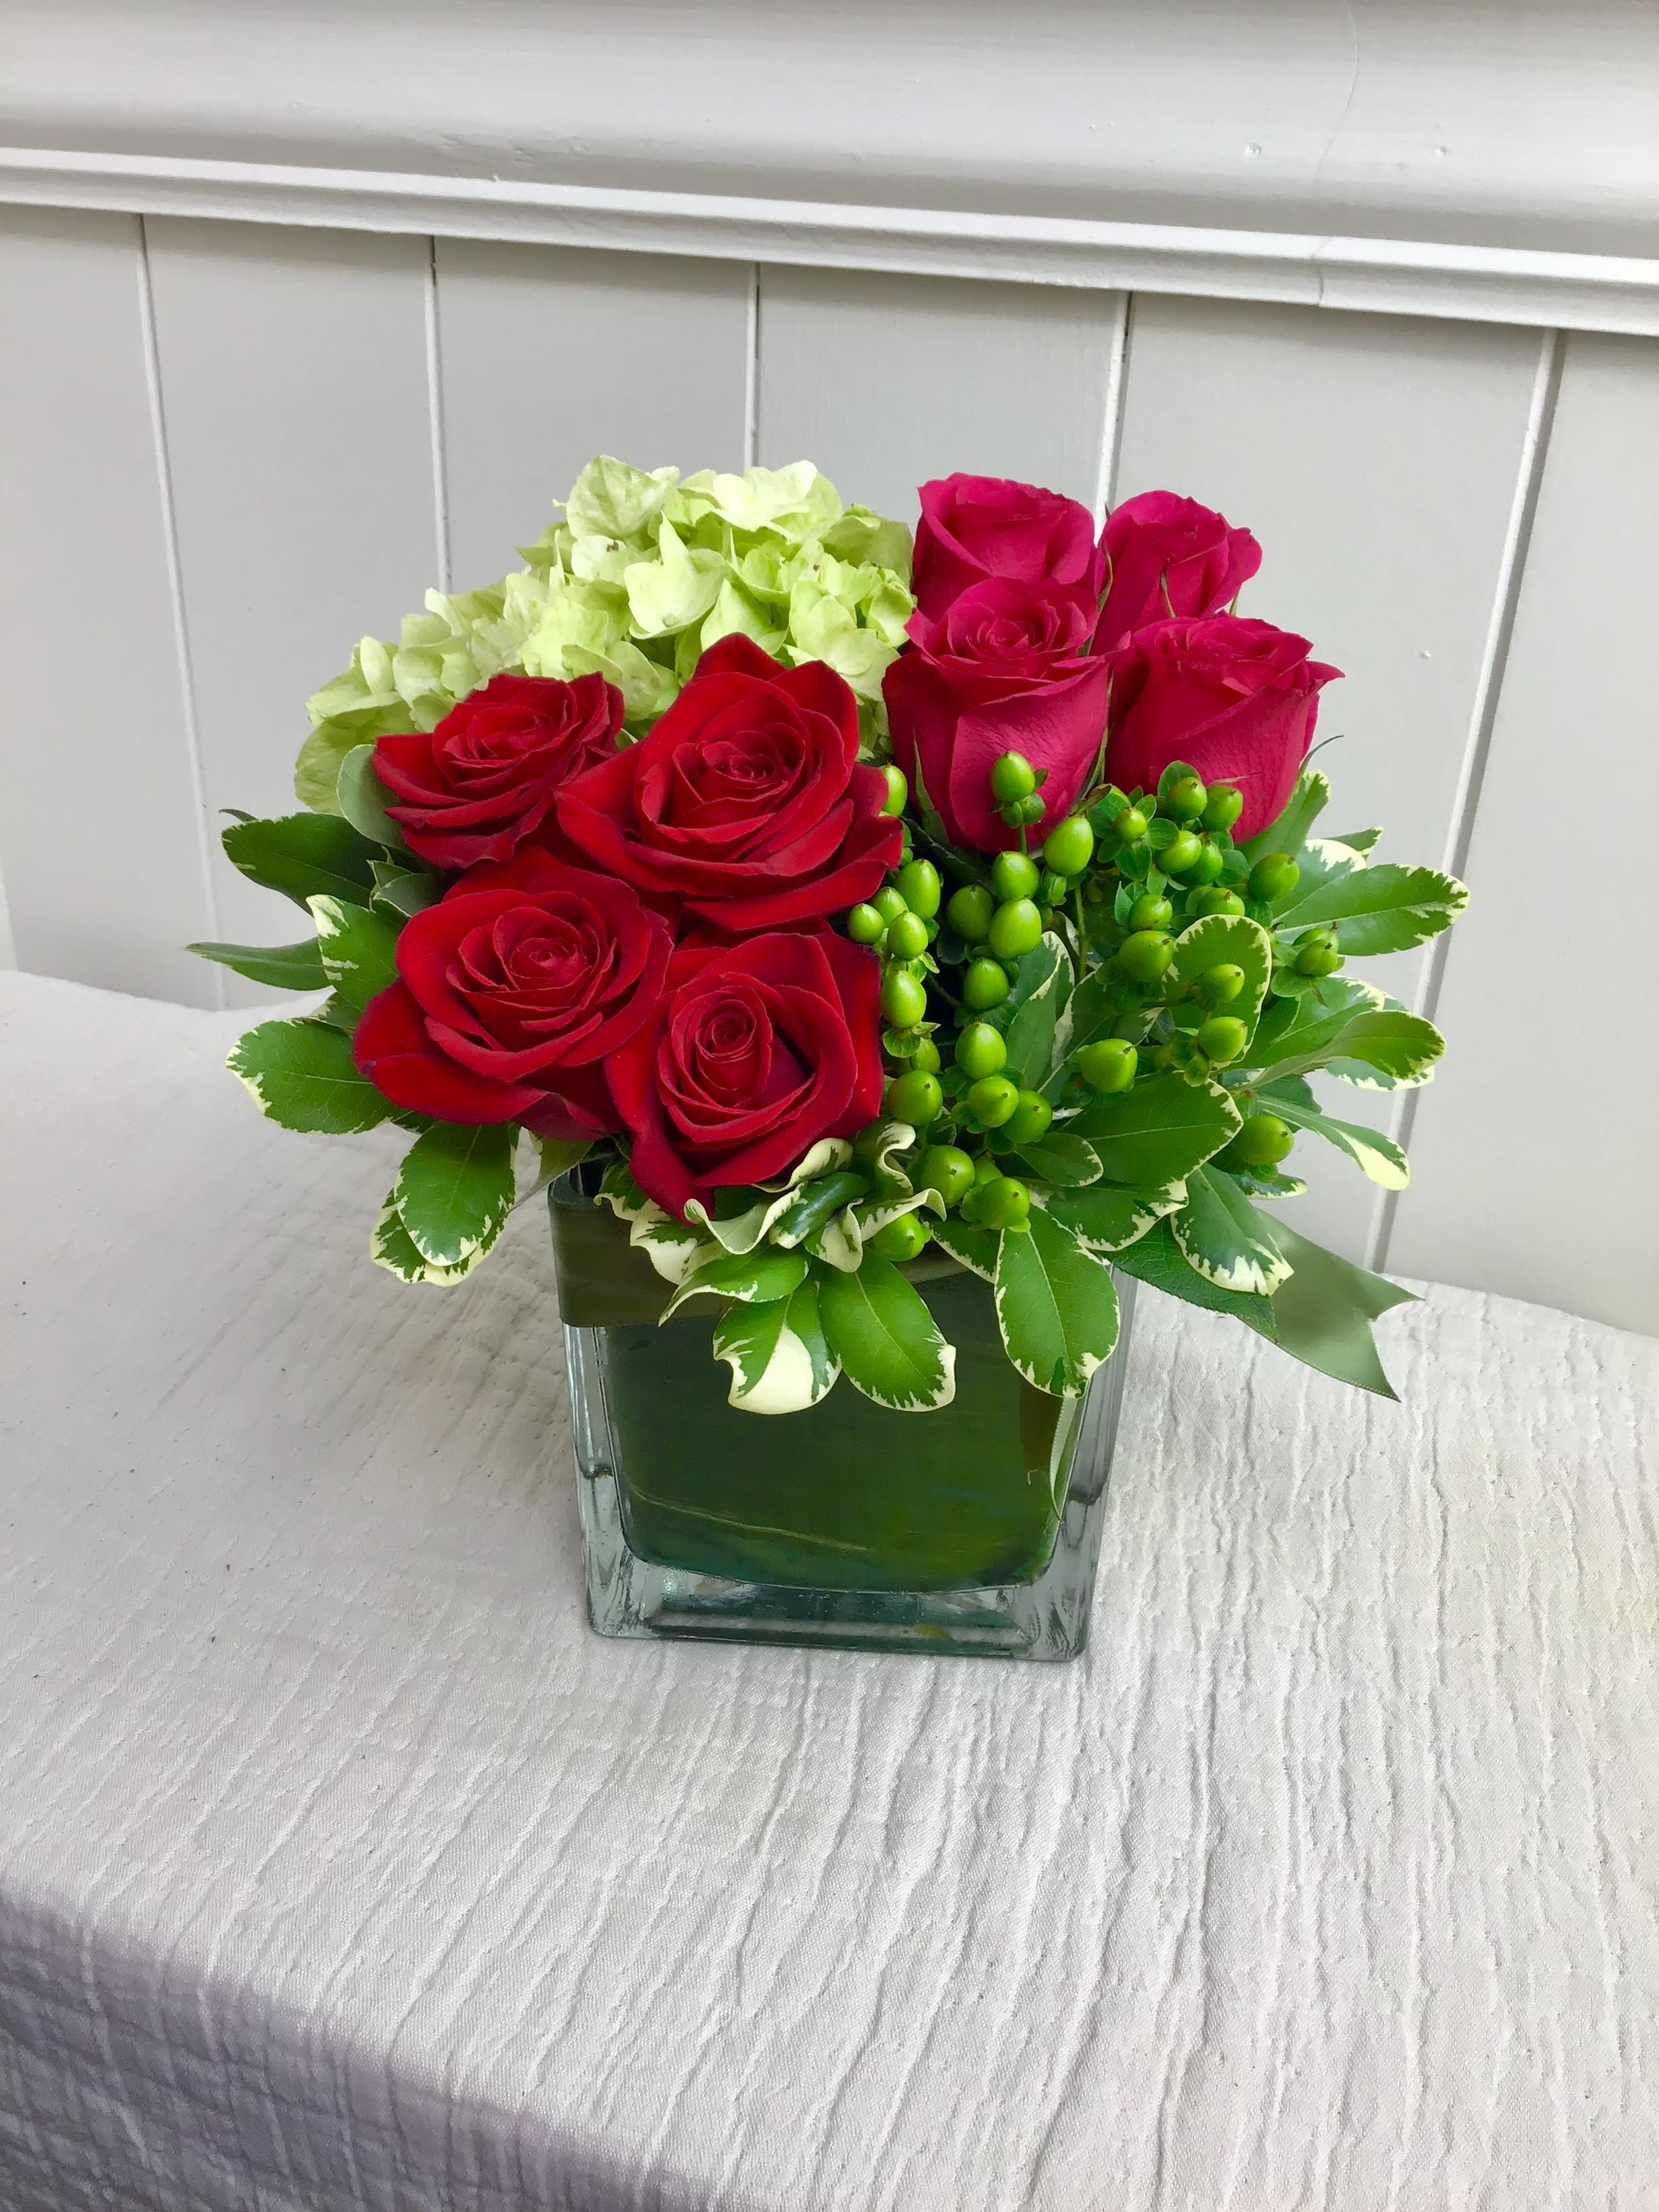 French Pave' - A modern arrangement showing off the French Pave design. With lovely roses, hydrangeas and hypericum berries, this is a beautiful, long lasting, piece of art!